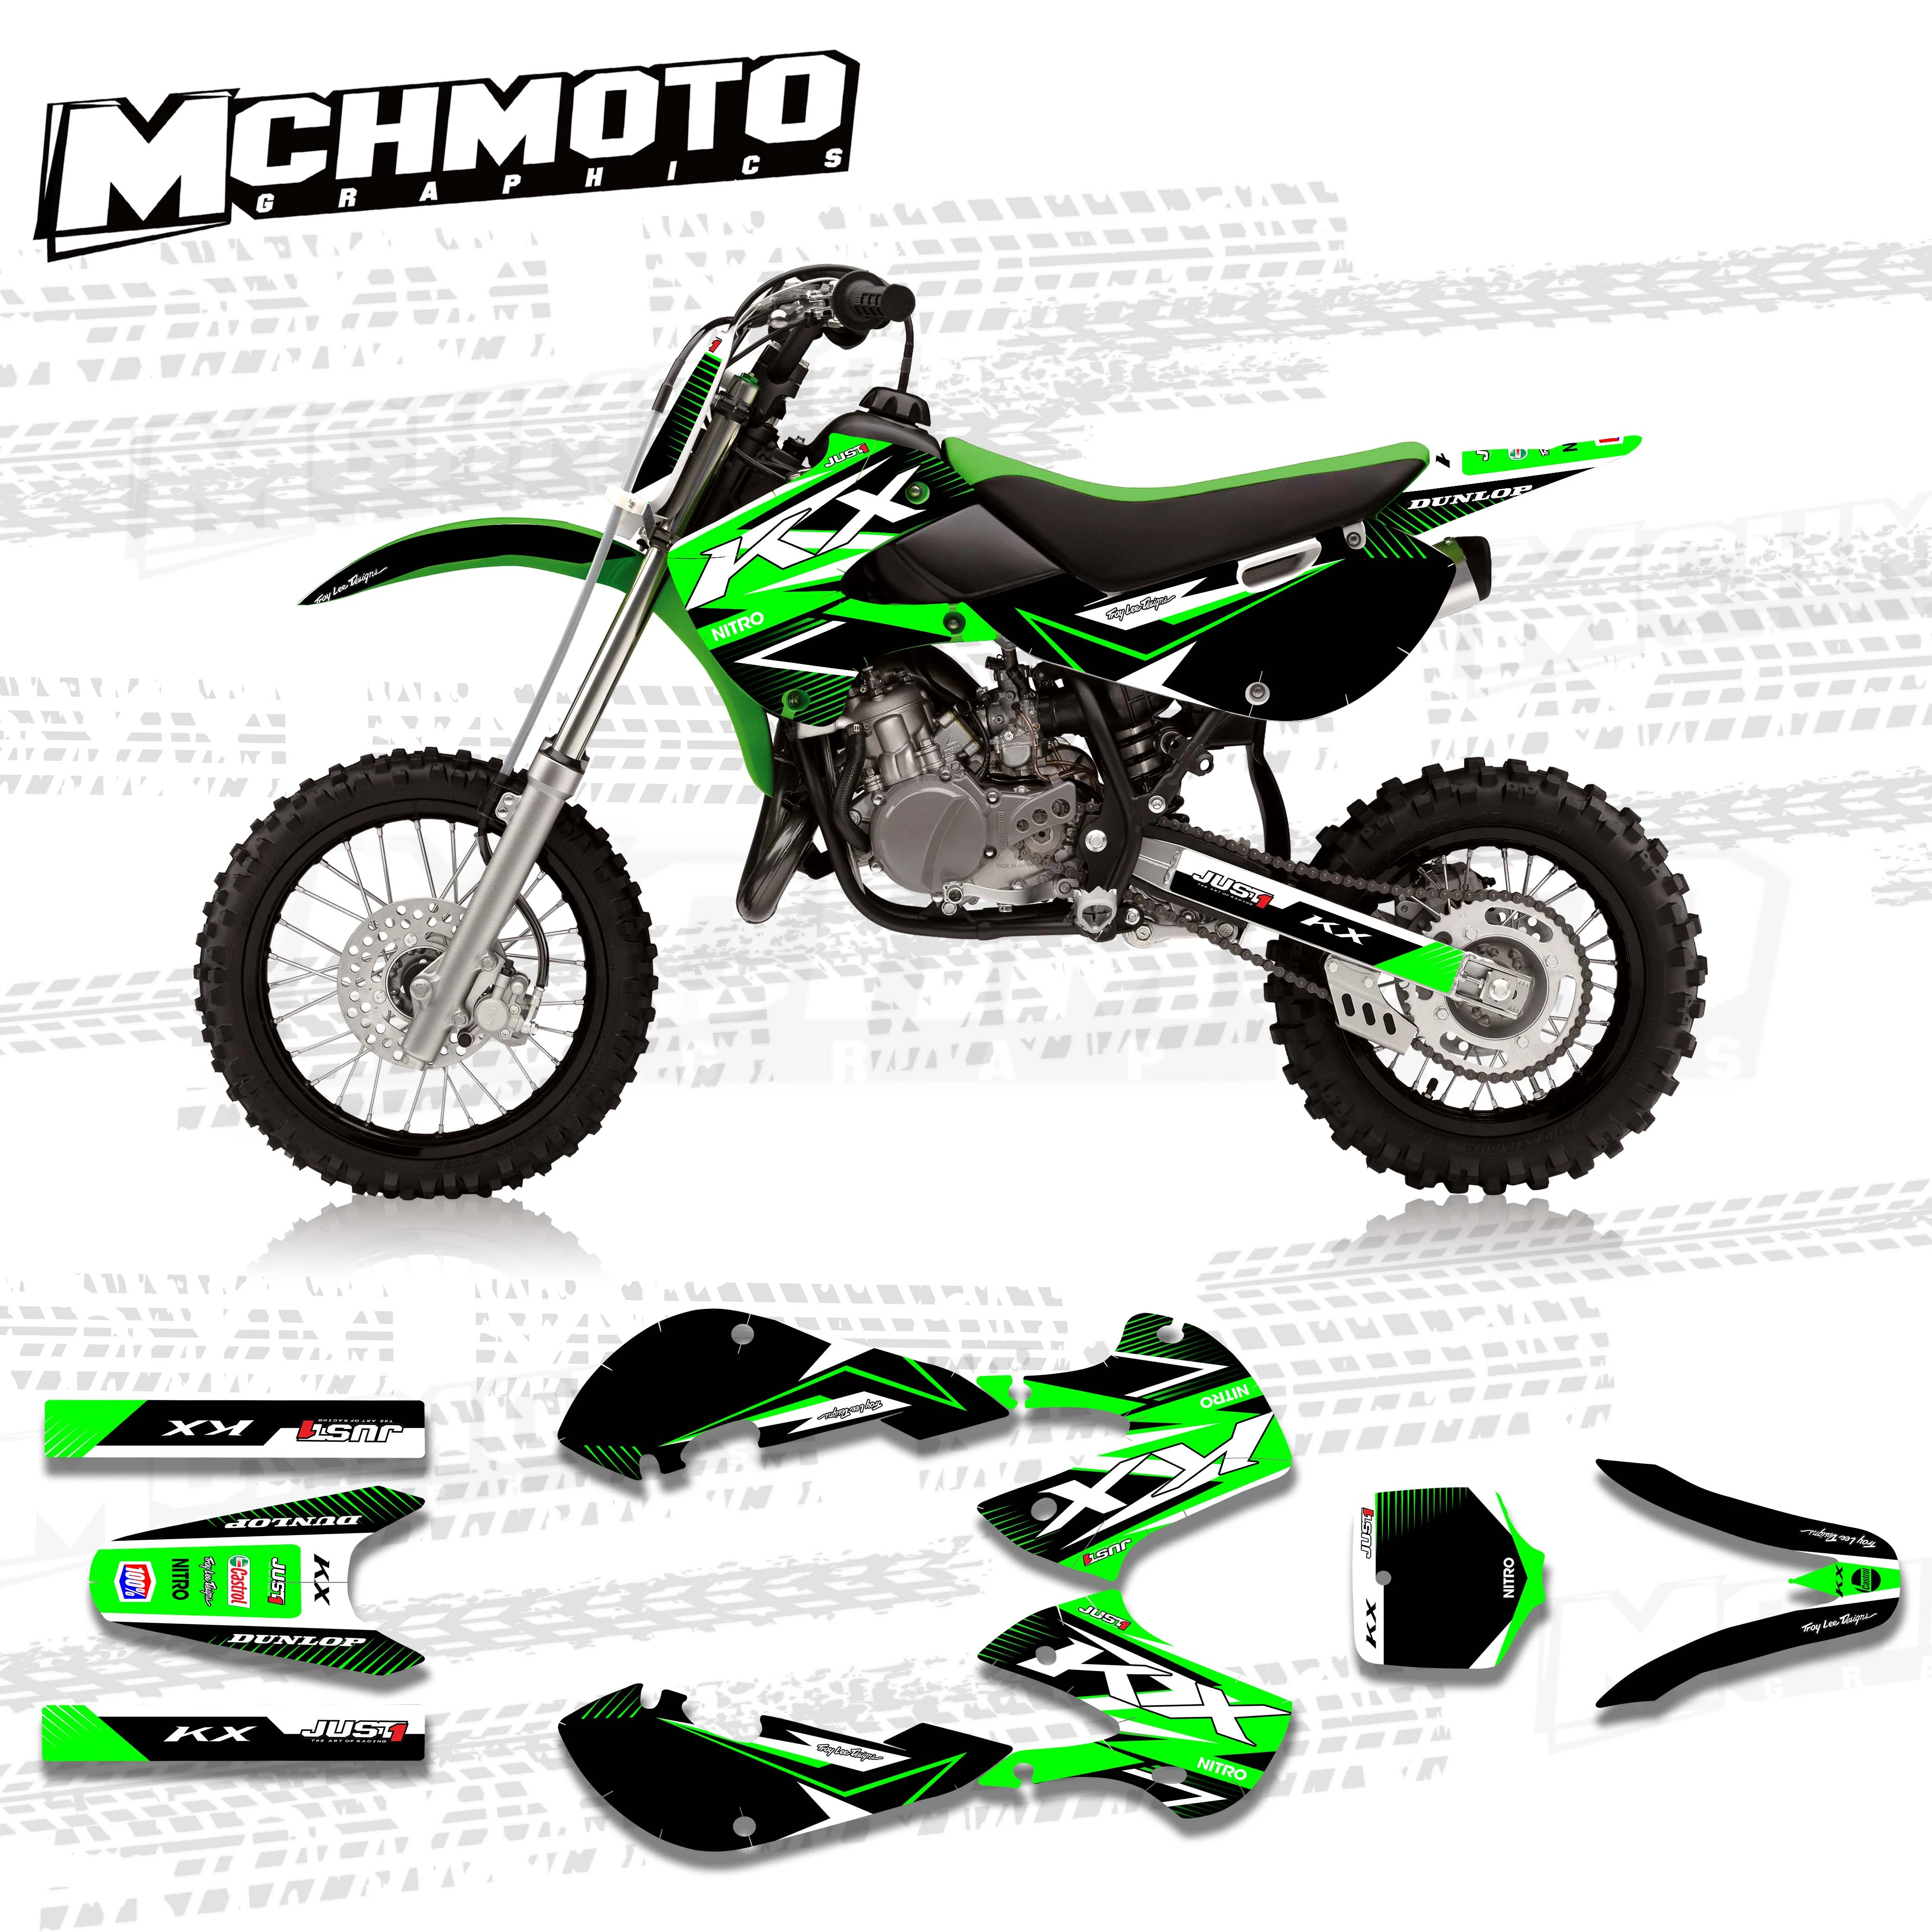 MCHMFG Graphics for KAWASAKI KX 65 2000 2011 2012 2013 2014 2015 2016 2017 2018 2019 2020 Graphi|Decals & Stickers| -